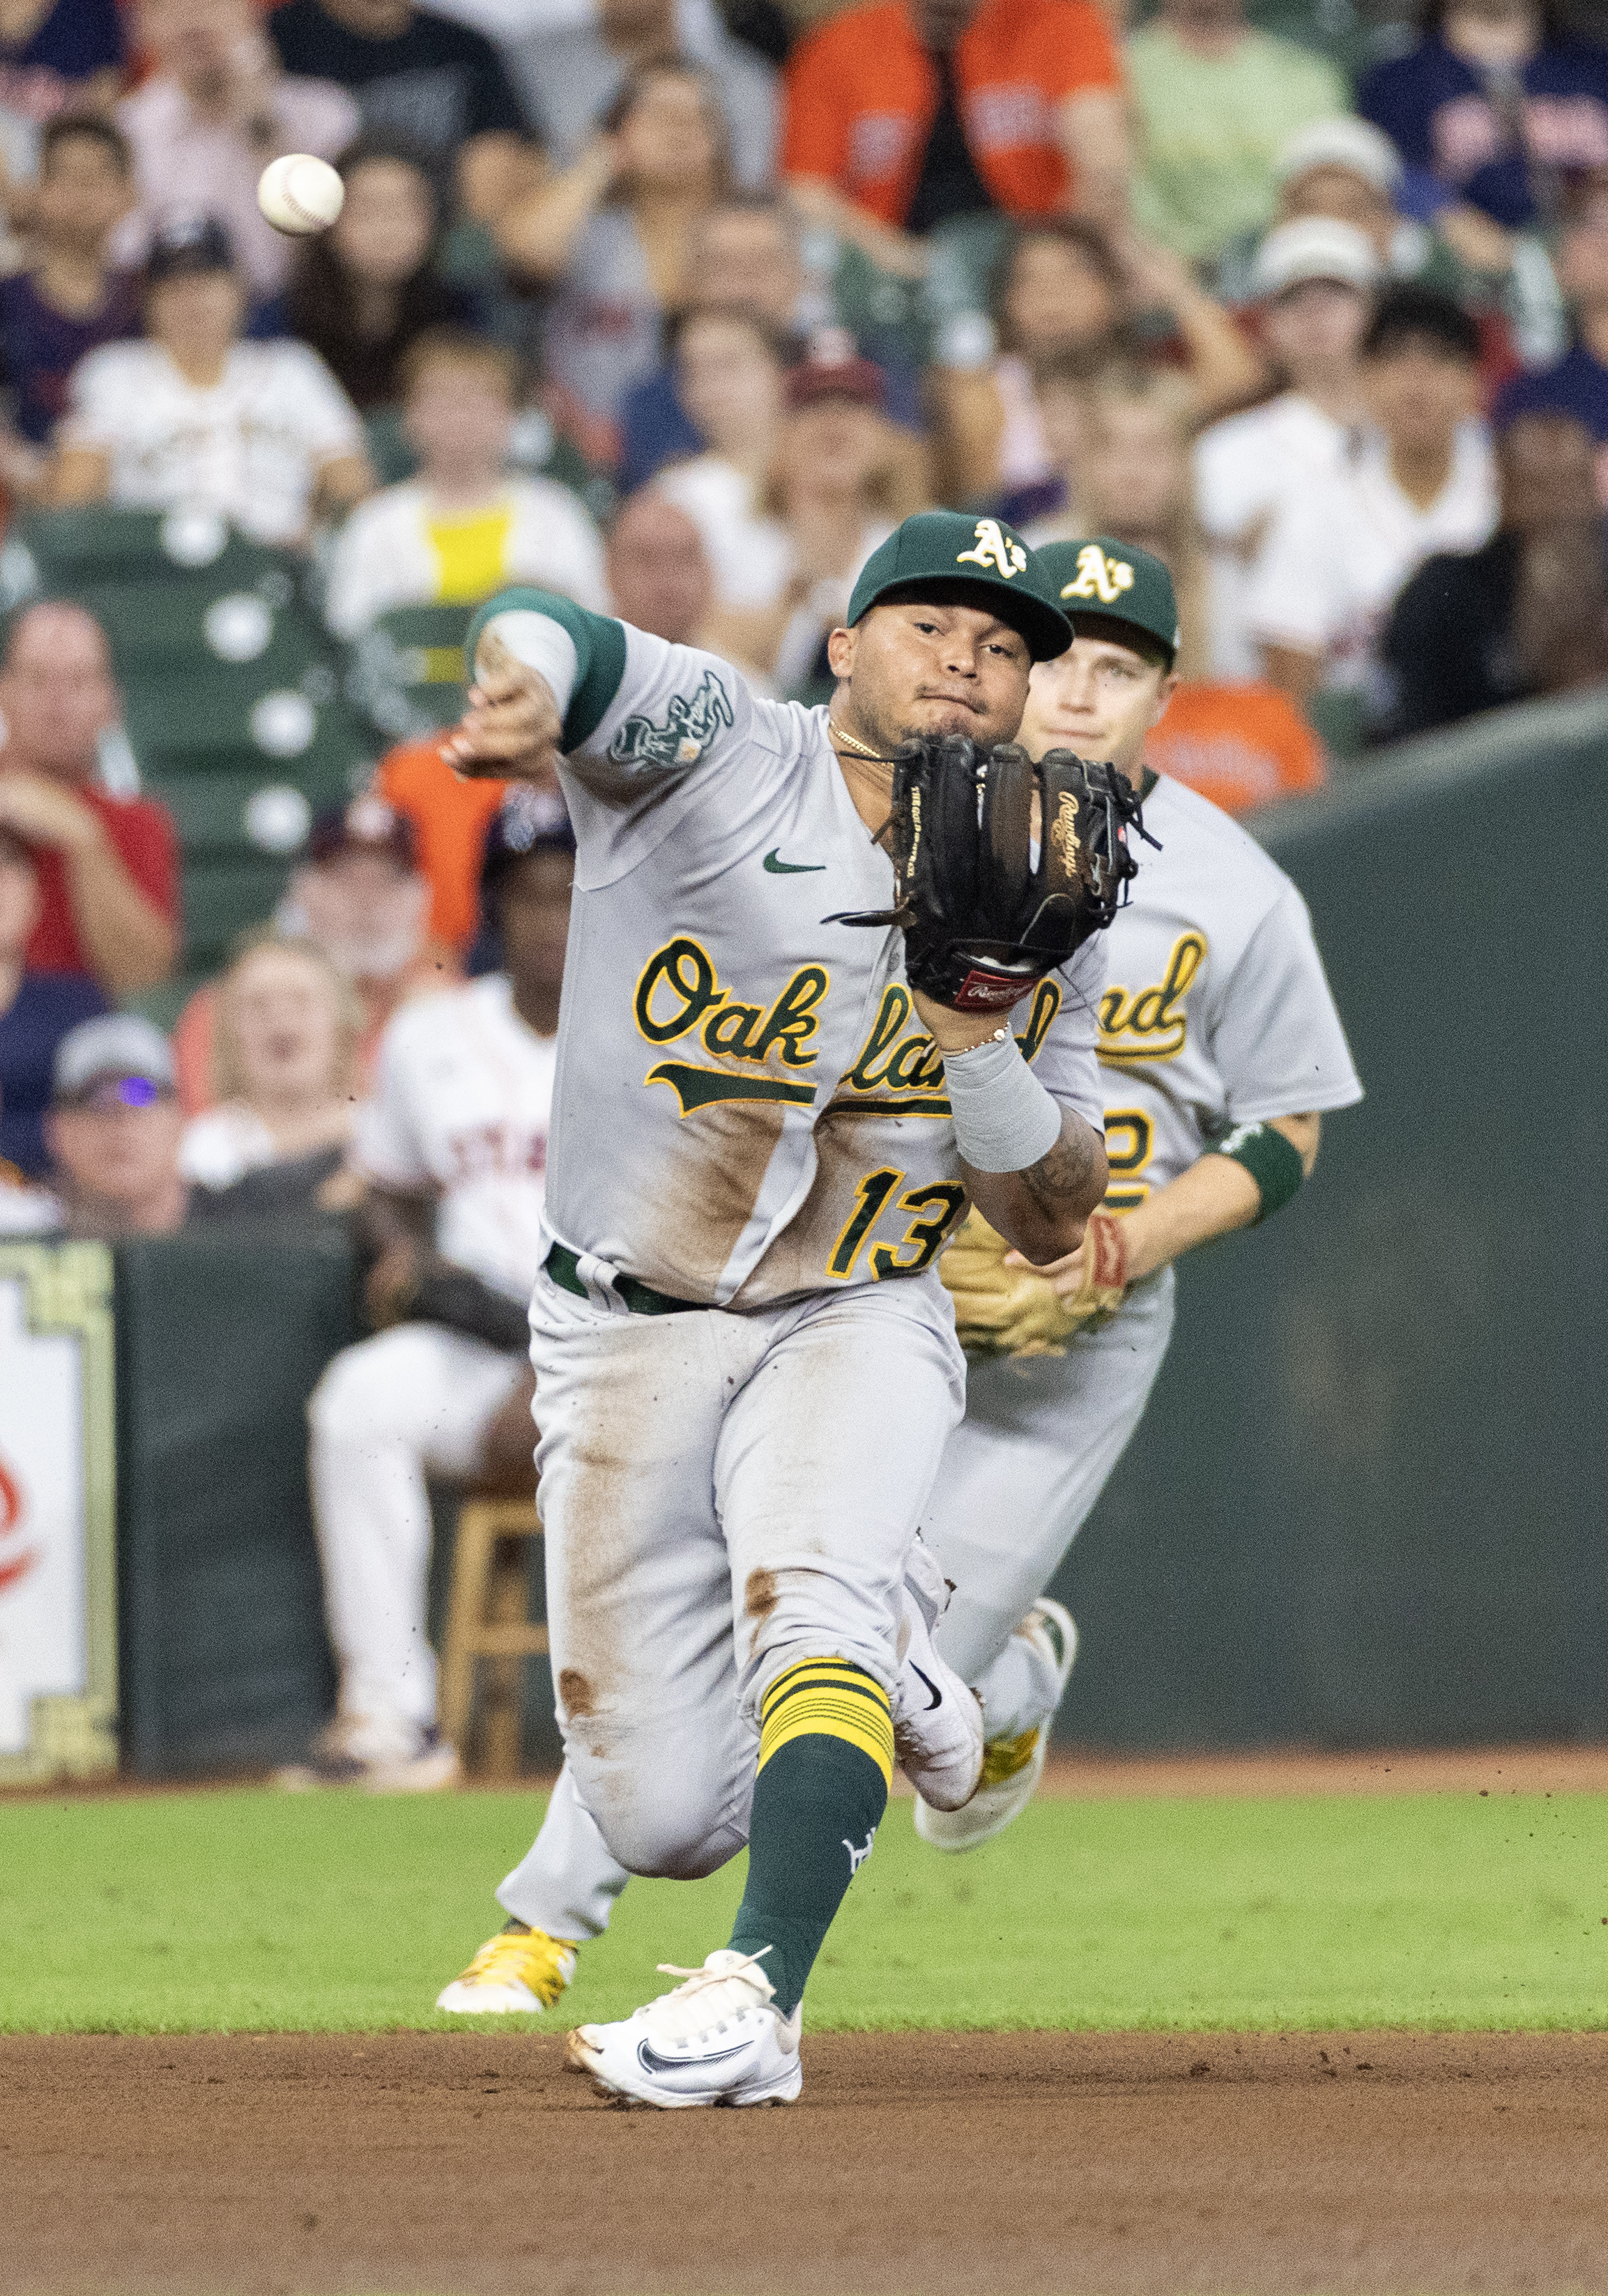 Langeliers, Kemp homer as Athletics down Astros again 6-2 to avoid 100th  loss - The San Diego Union-Tribune